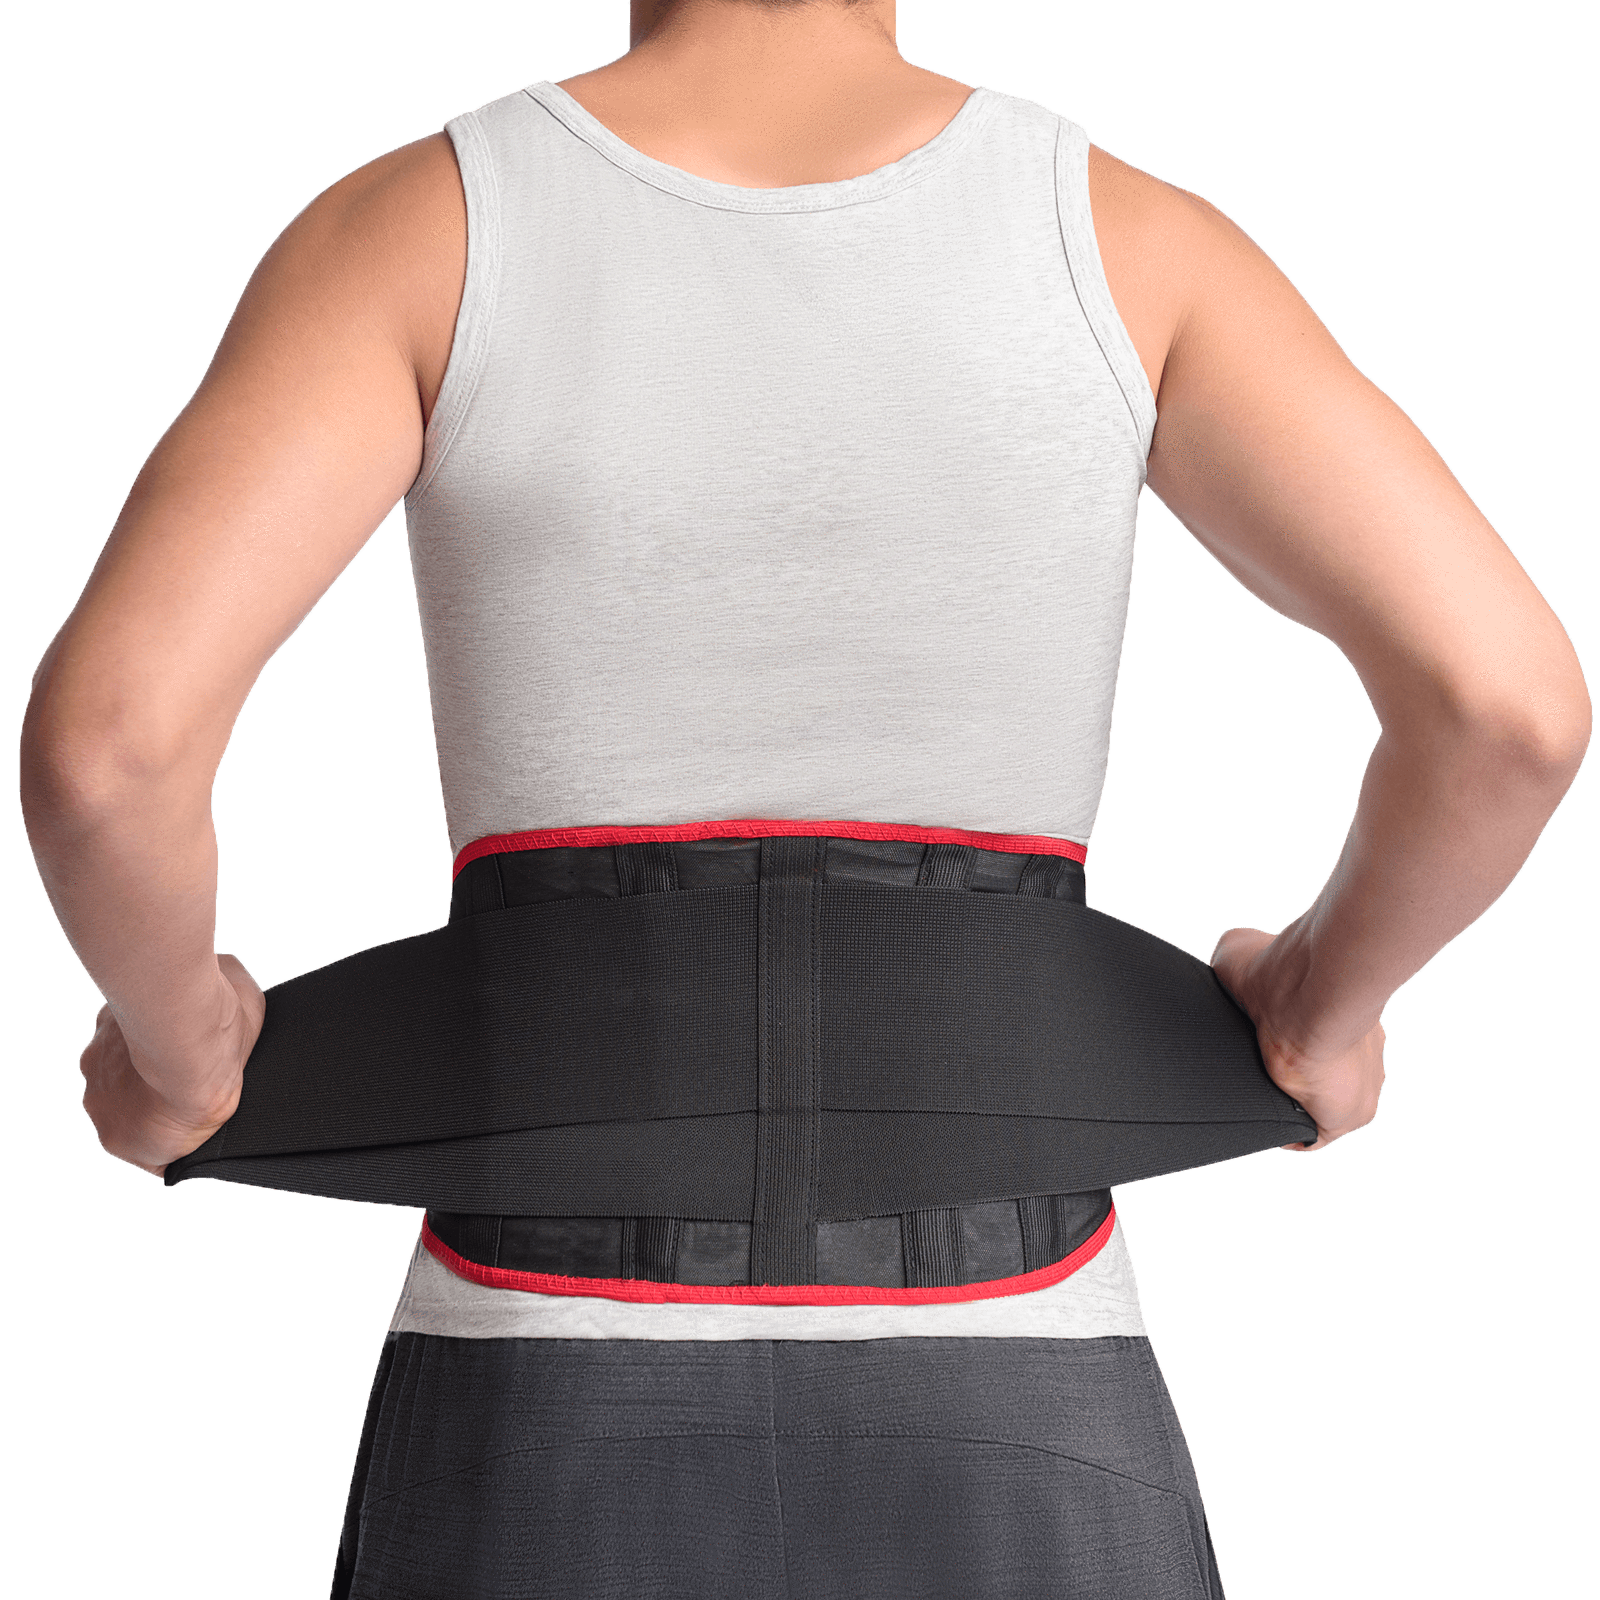 MaxBack Back Braces for Lower Back Pain Relief with 6 Stays